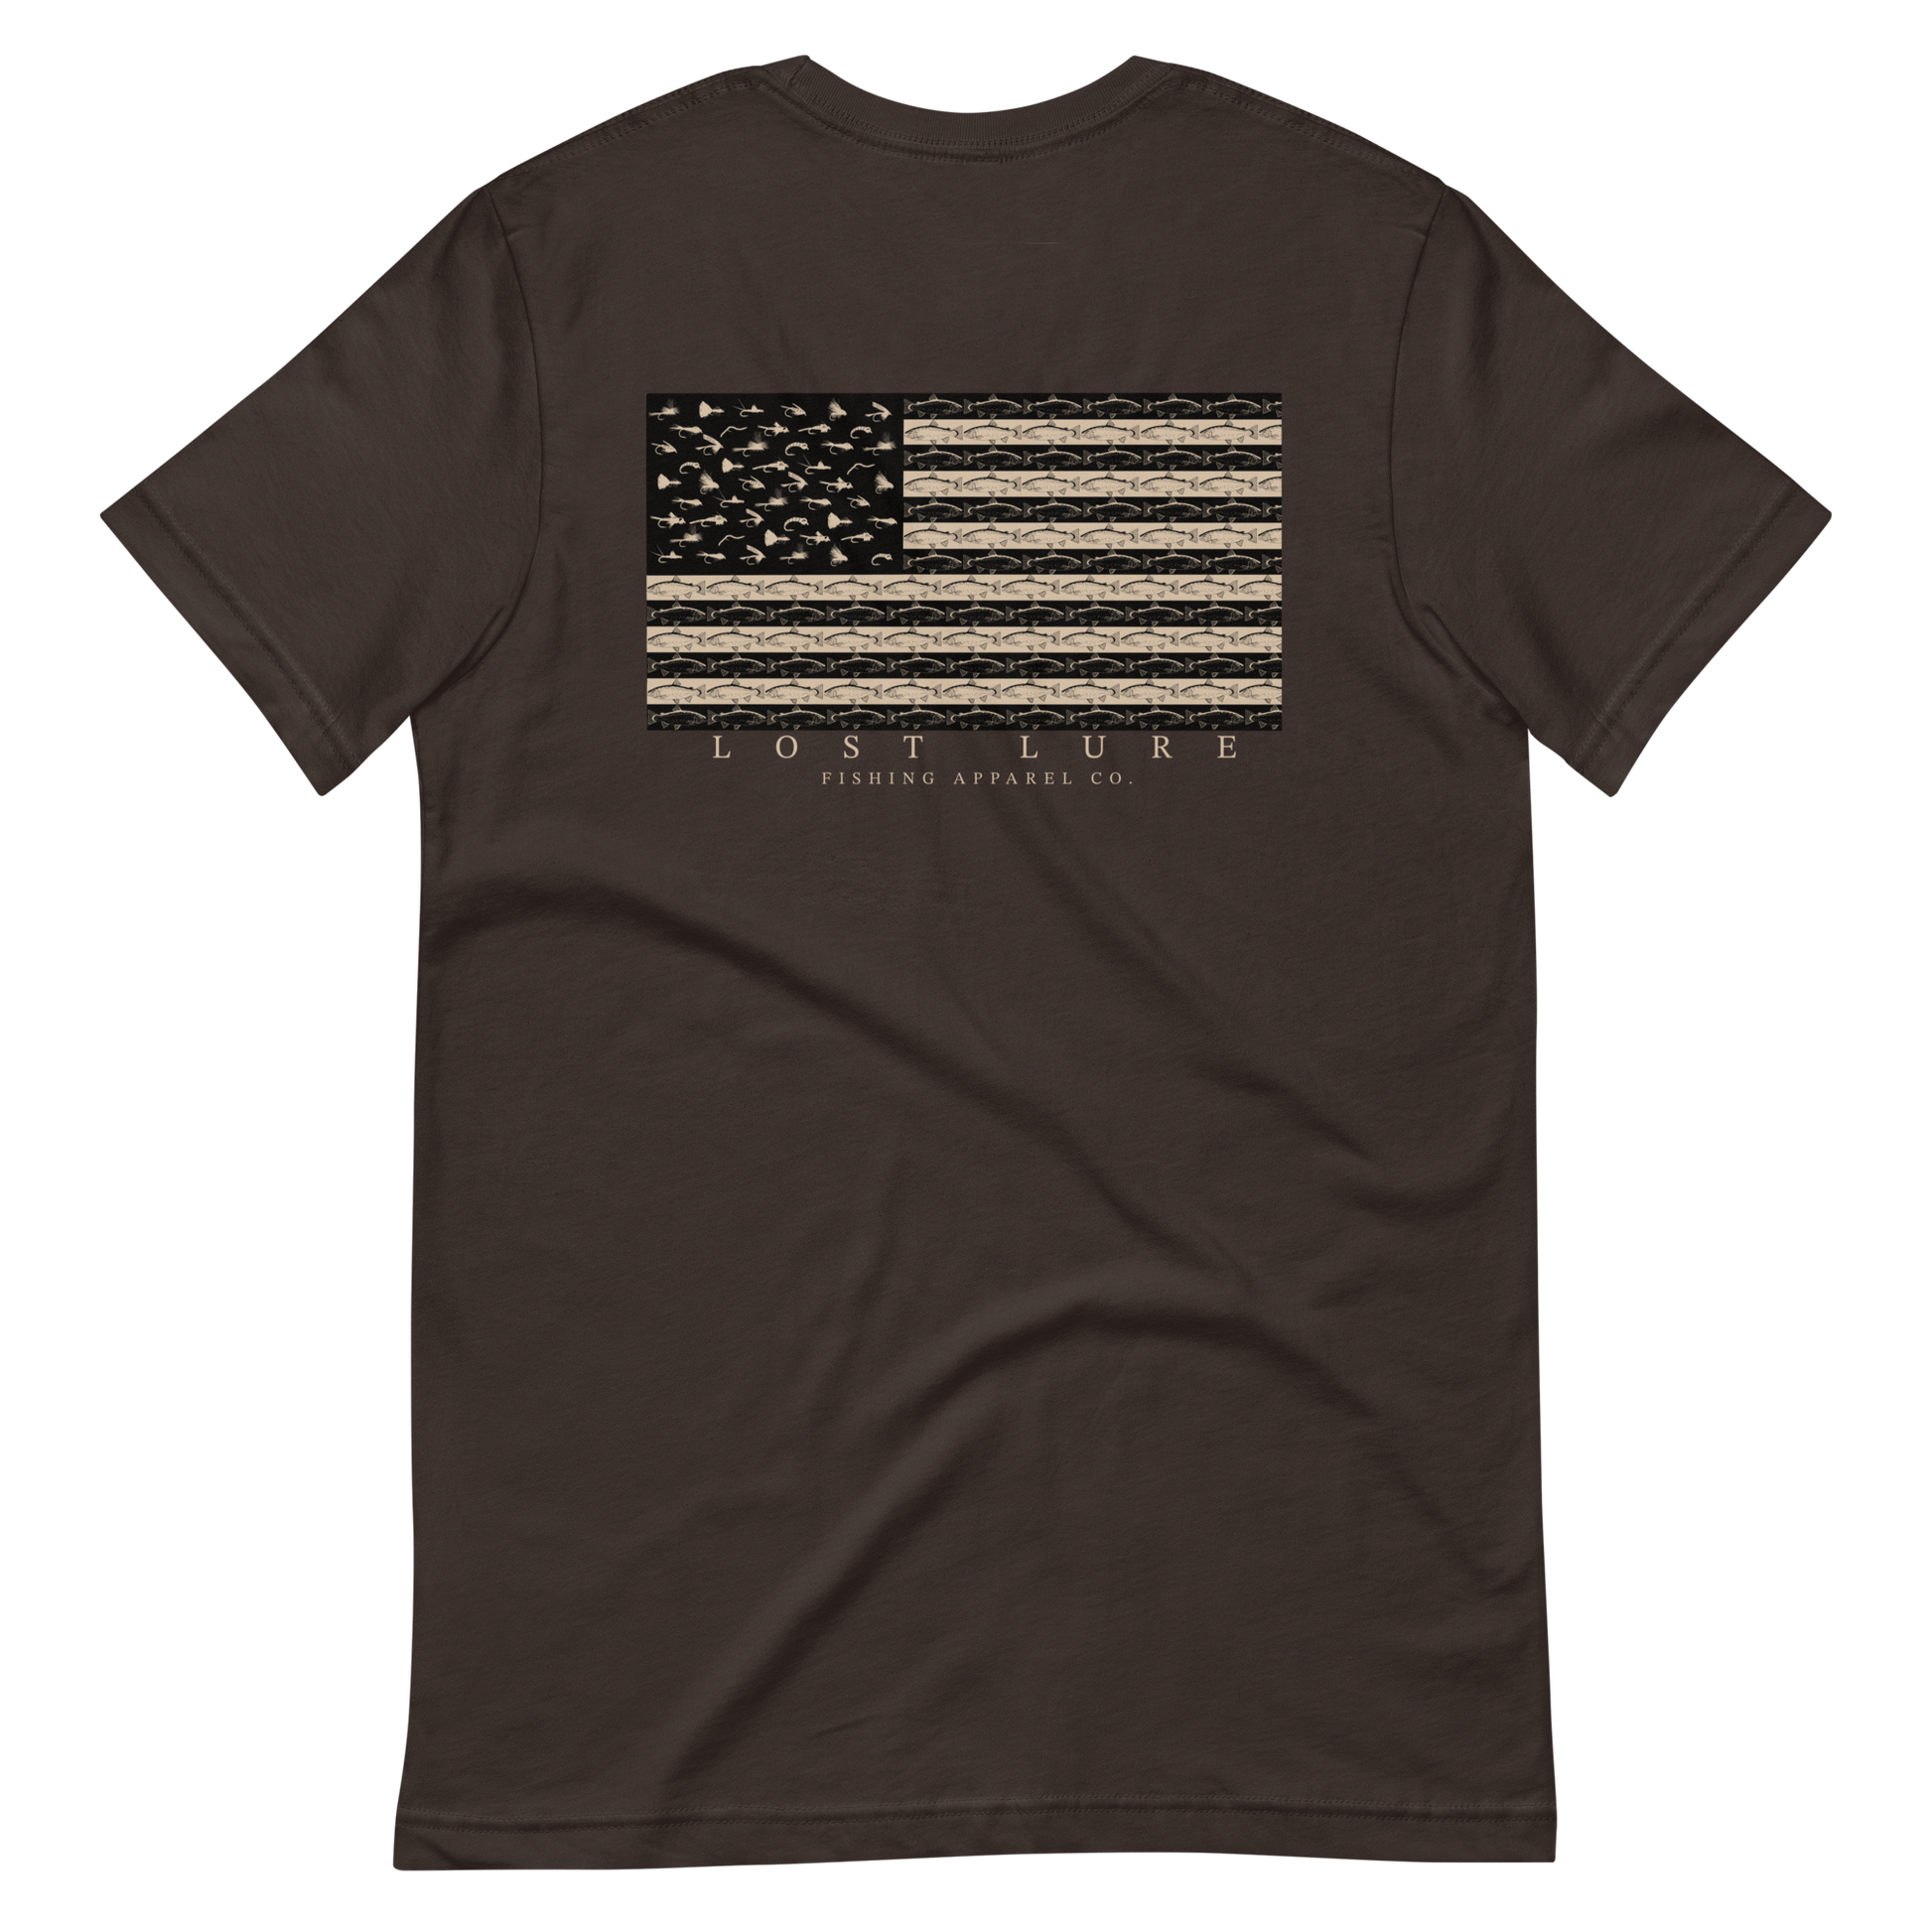 American Flag / US flag fishing shirt. It has 50 flies replacing the stars and trout as the stripes. brown Lost Lure fishing shirt. Back side